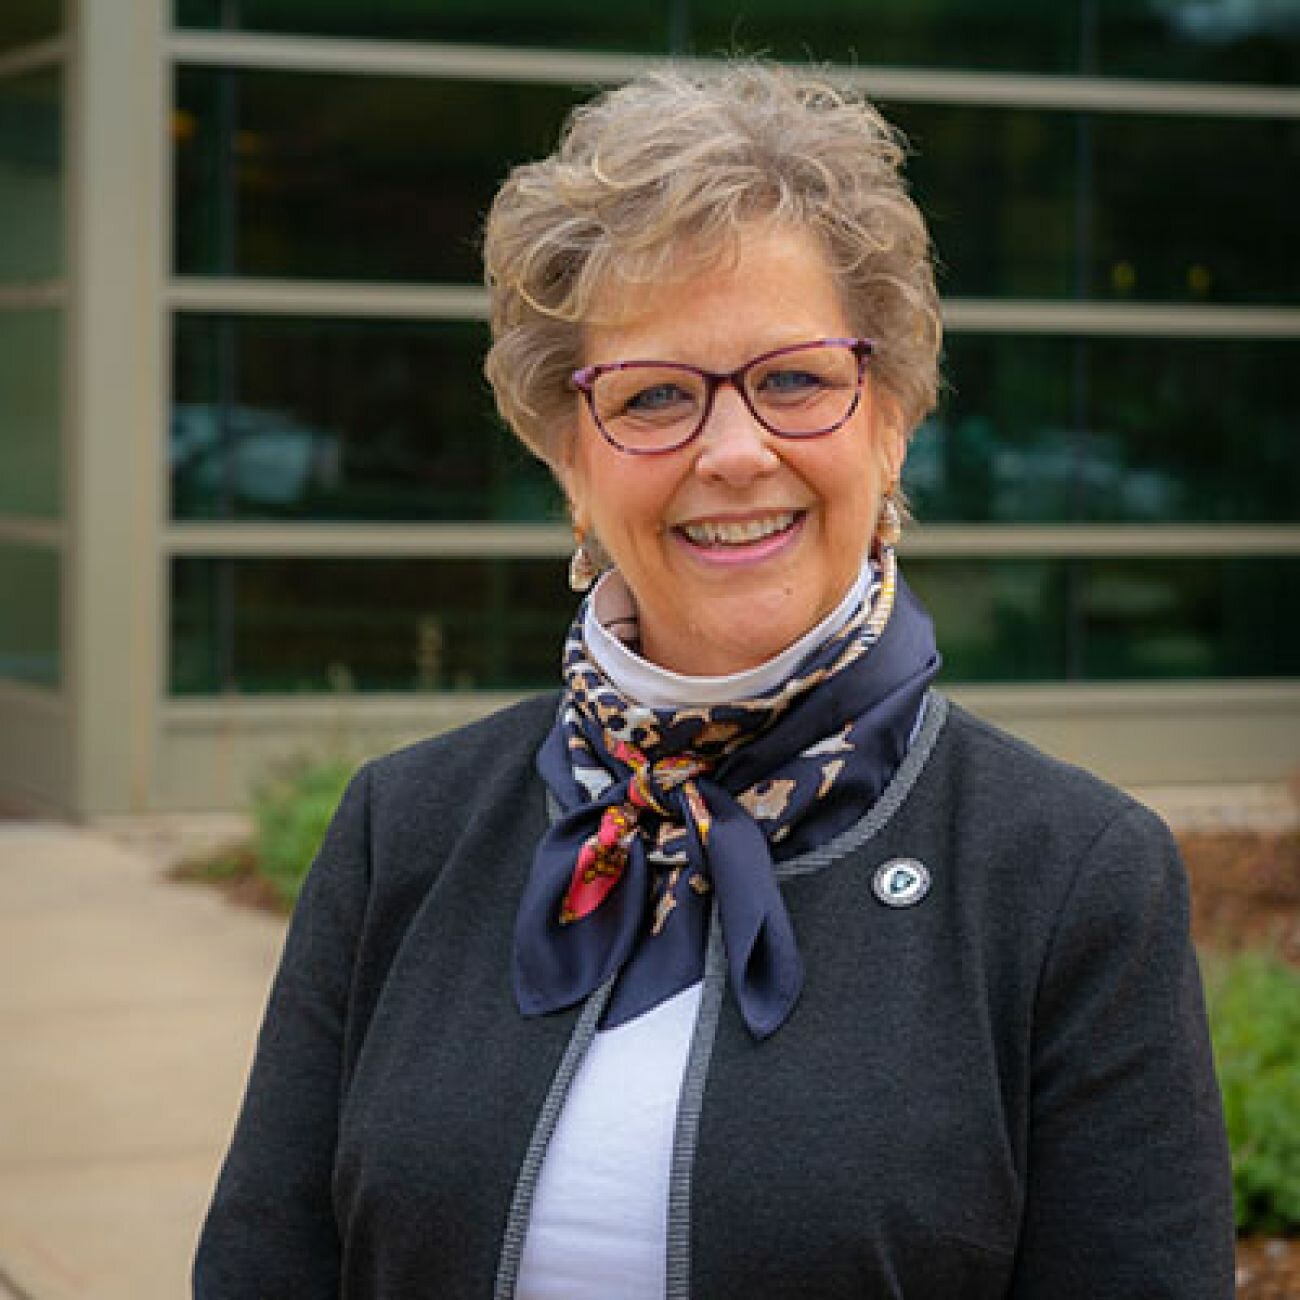 Leigh Small, dean of Michigan State University’s College of Nursing, said she worries that the new University of Michigan control at Sparrow Health could one day endanger the training of Michigan State nursing students there.